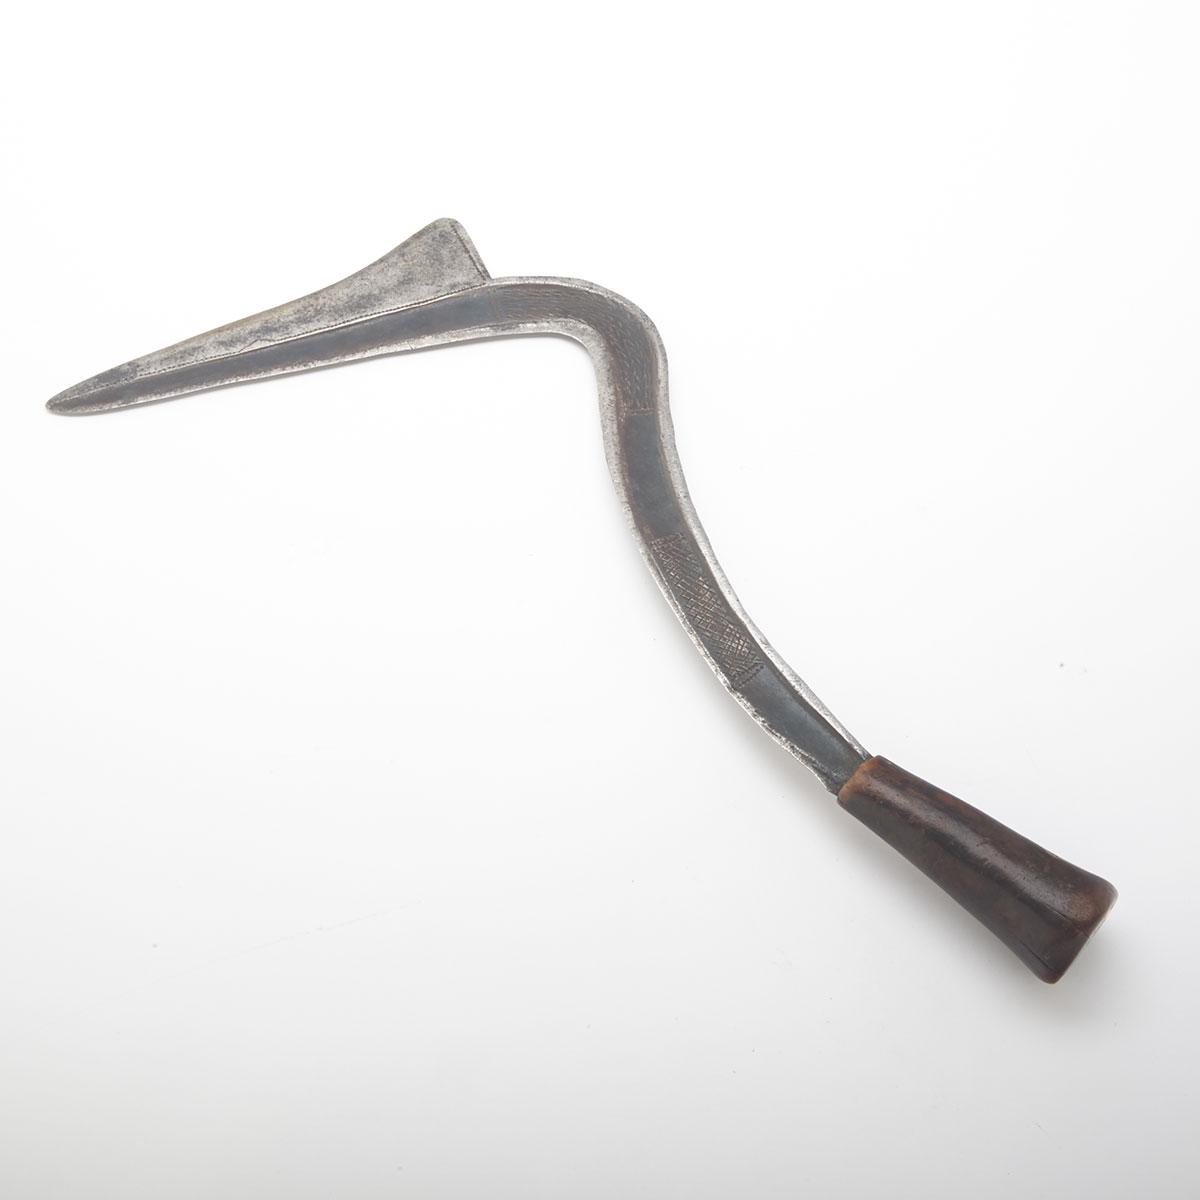 African Ngombe Sickle Knife, 19th century